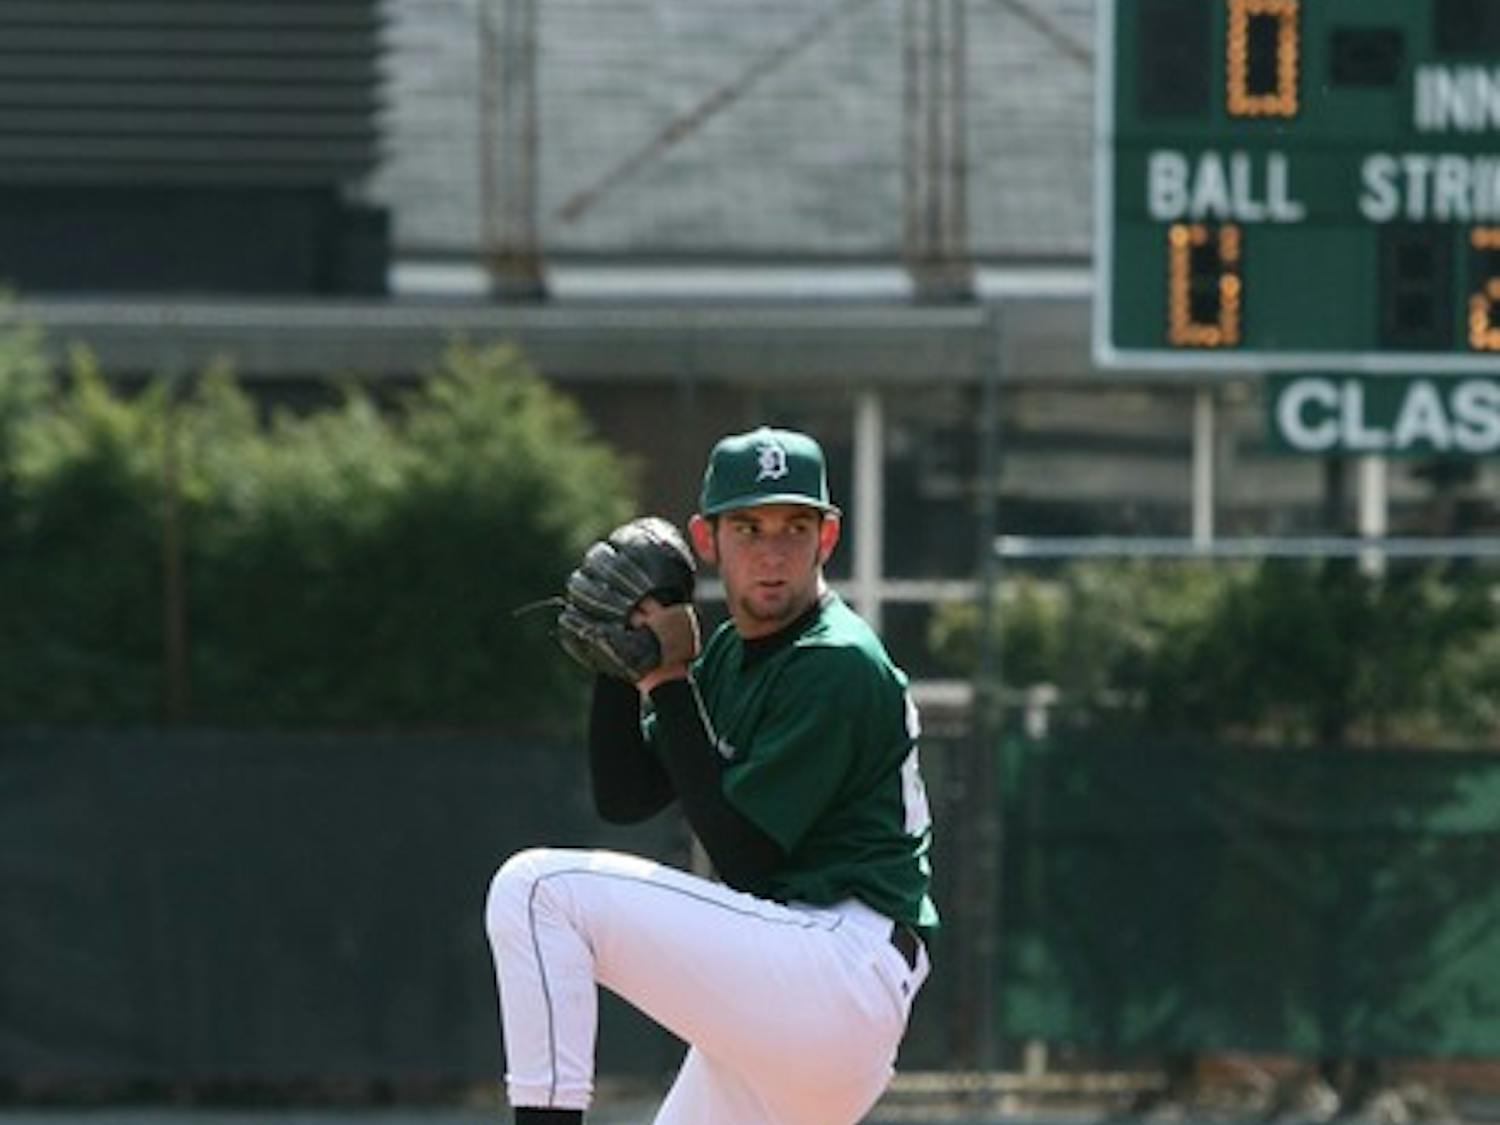 The Big Green baseball team caught a glimpse this season's potential after winning two of three games against Navy last weekend.